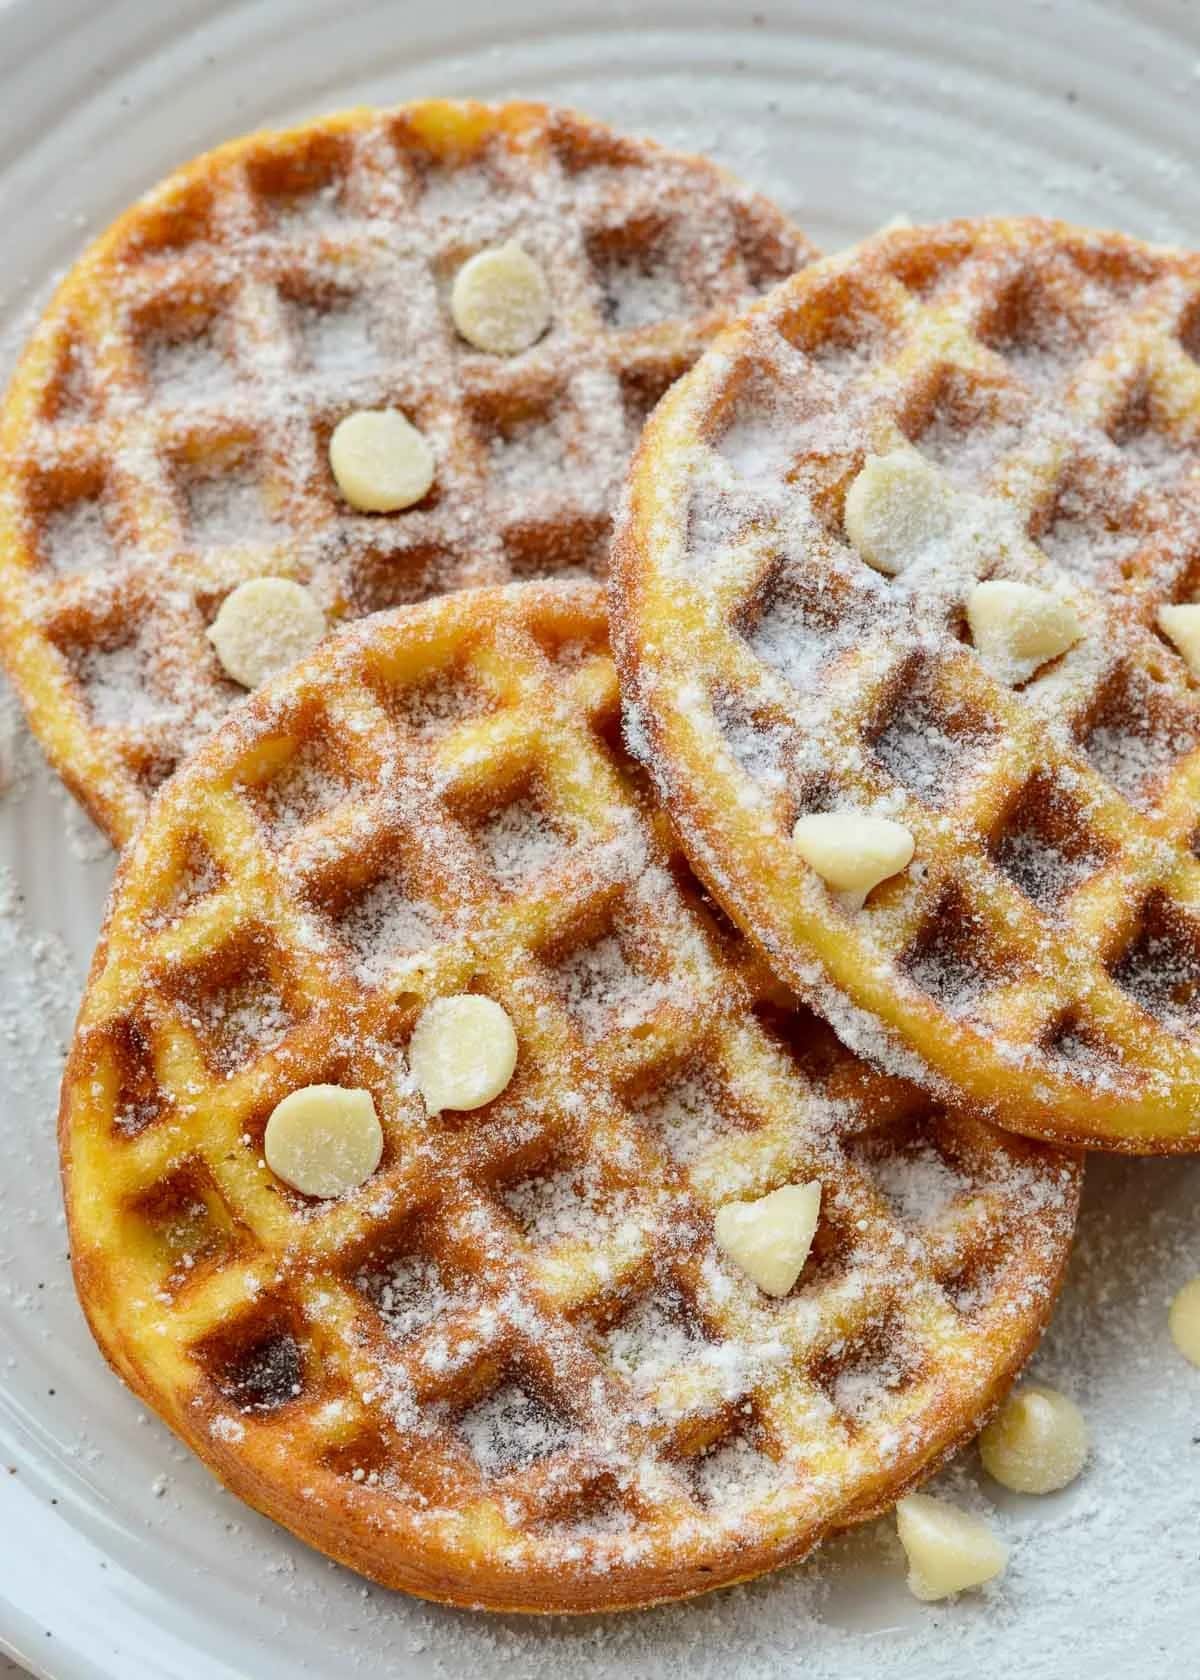 These Sweet Chaffles are perfect for a low-carb breakfast, snack, or dessert! Cheesy waffles are soft, fluffy, and packed with sugar-free white chocolate chips for a treat around 1 net carb each.